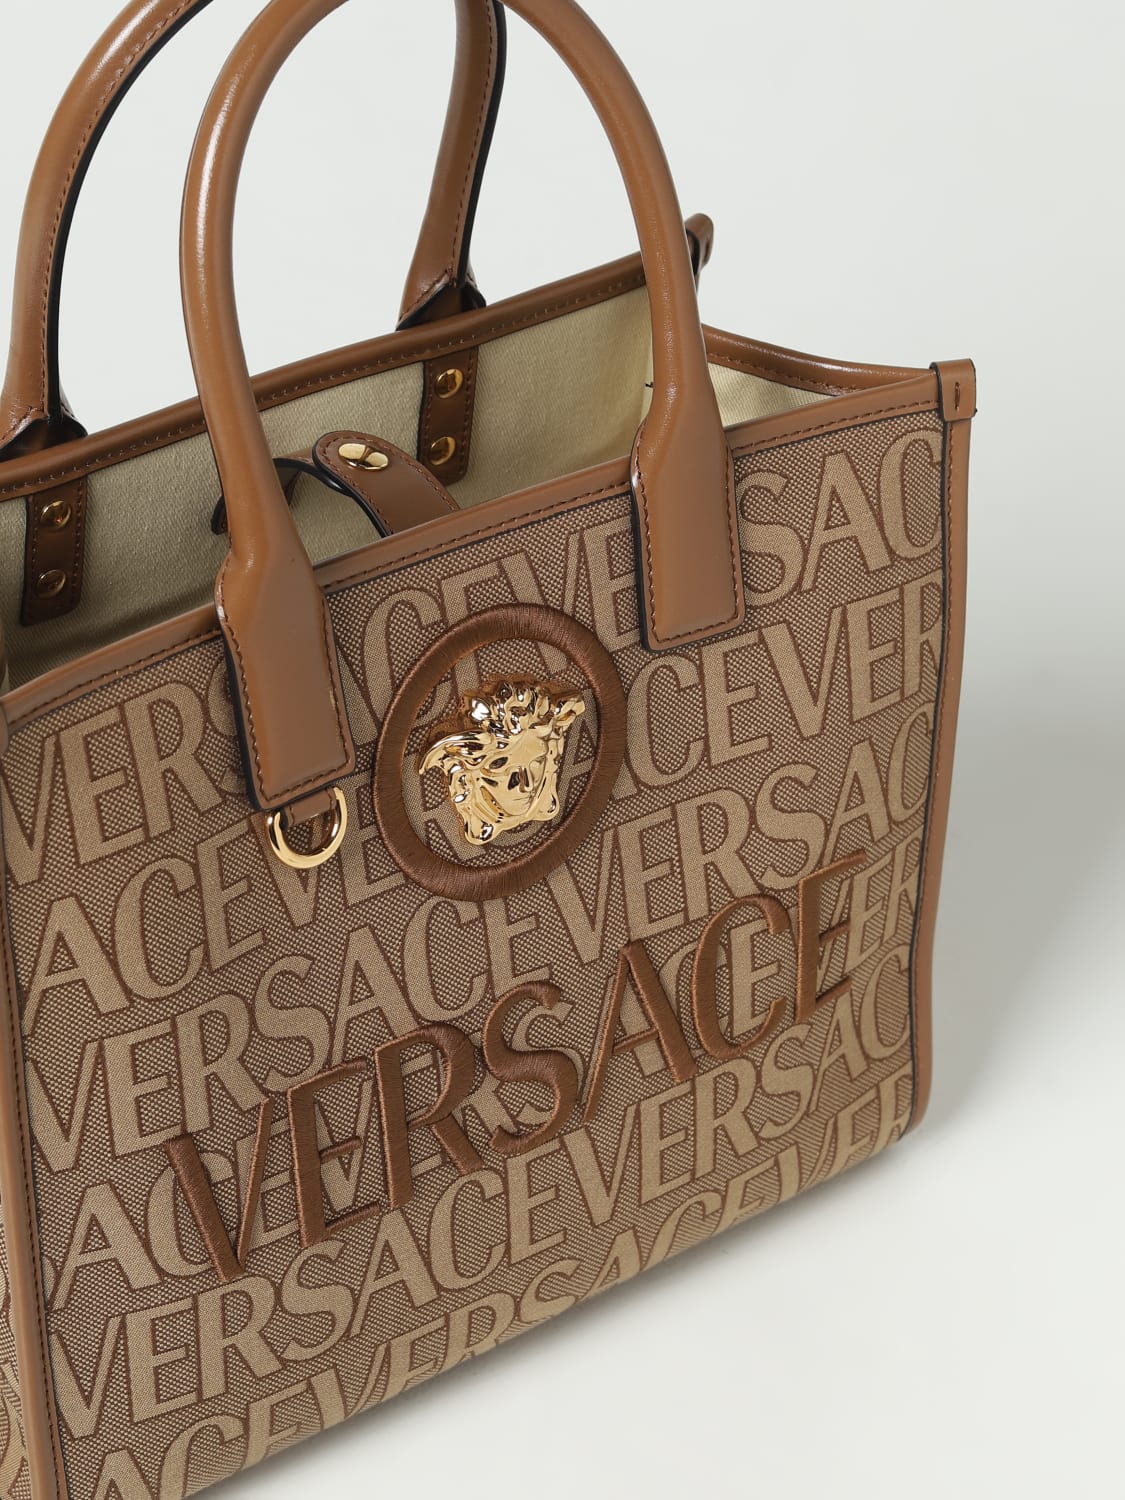 Read chorus experience VERSACE: Allover bag in jacquard fabric - Beige | Versace handbag  10058611A08199 online at GIGLIO.COM